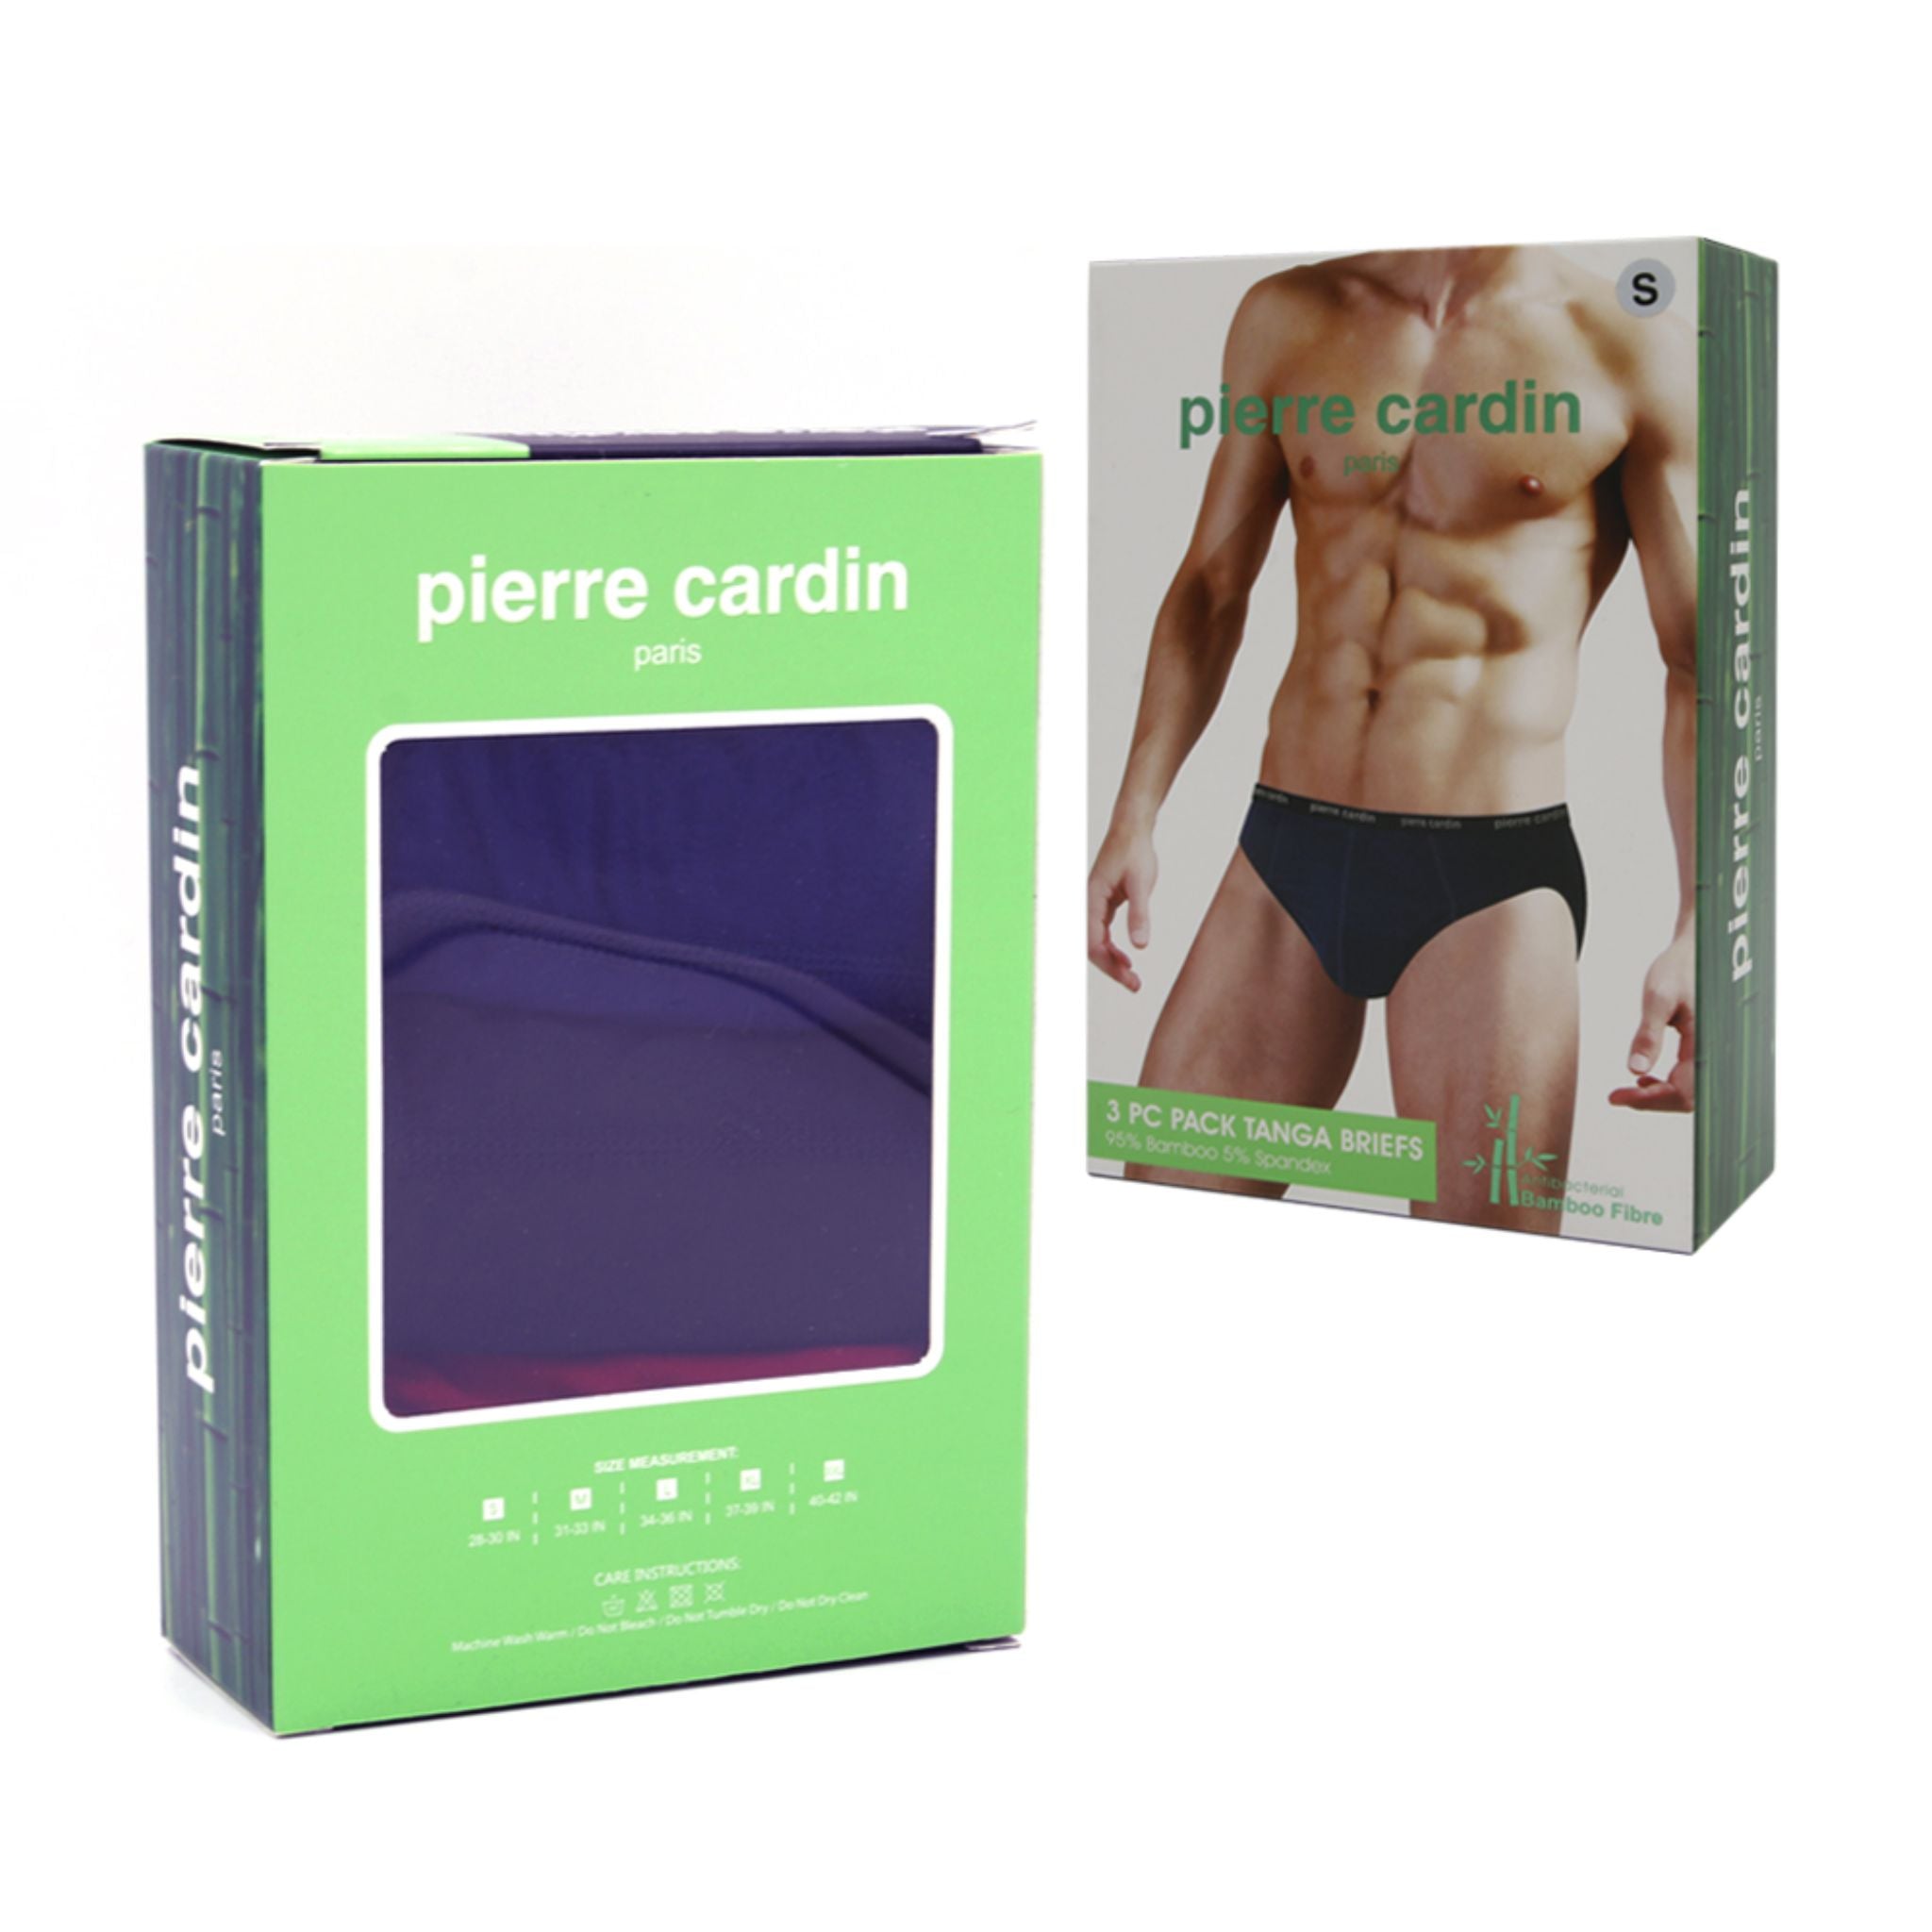 Pierre Cardin 3-pc Pack Tanga Briefs - Assorted Colours